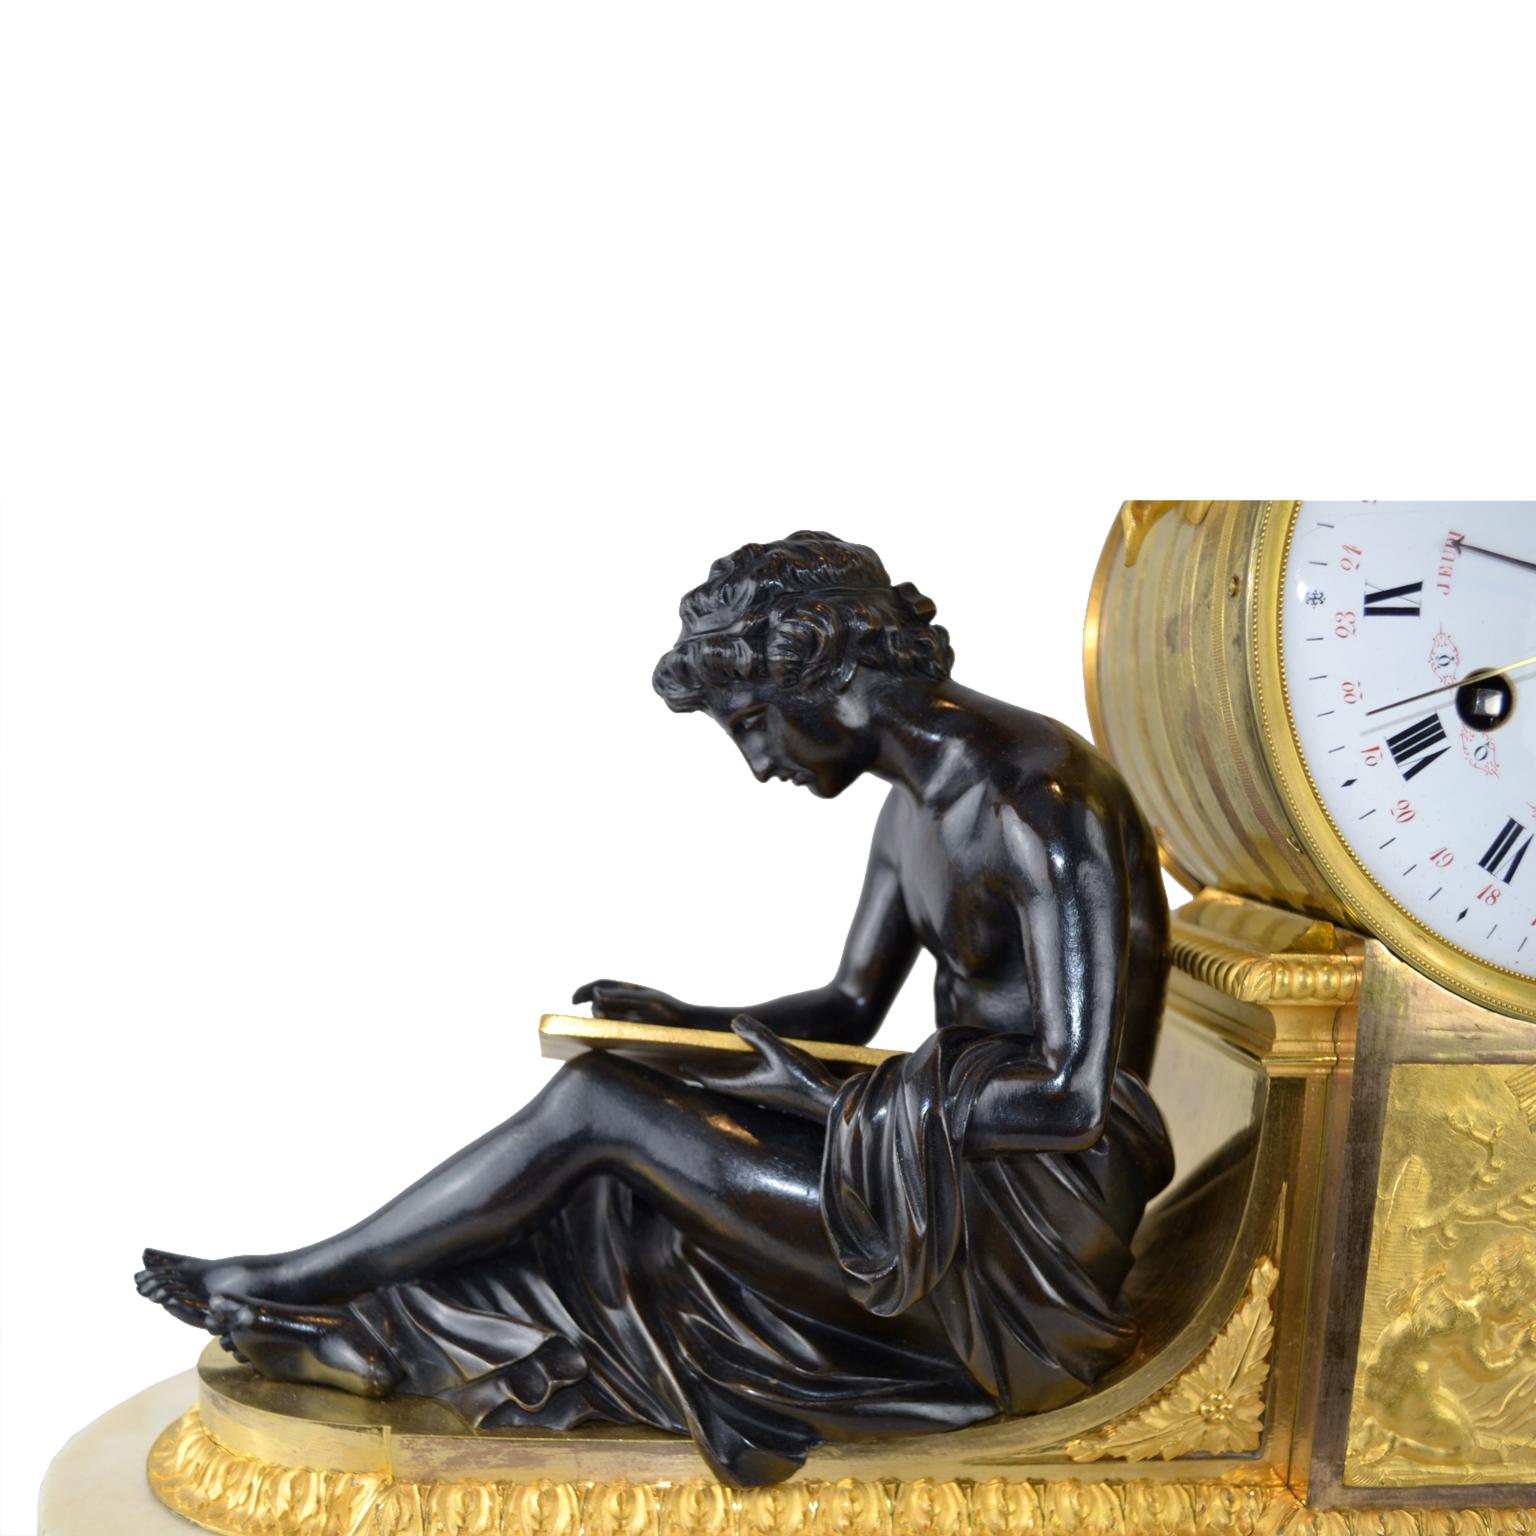 A Louis XVI mantle clock depicting “L’Etude et La Philosophie” (Learning and Philosophy). The clock is comprised of a circular white-enamelled dial with Roman hours and Arabic quarter marks and a further inner Arabic chapter ring for the day of